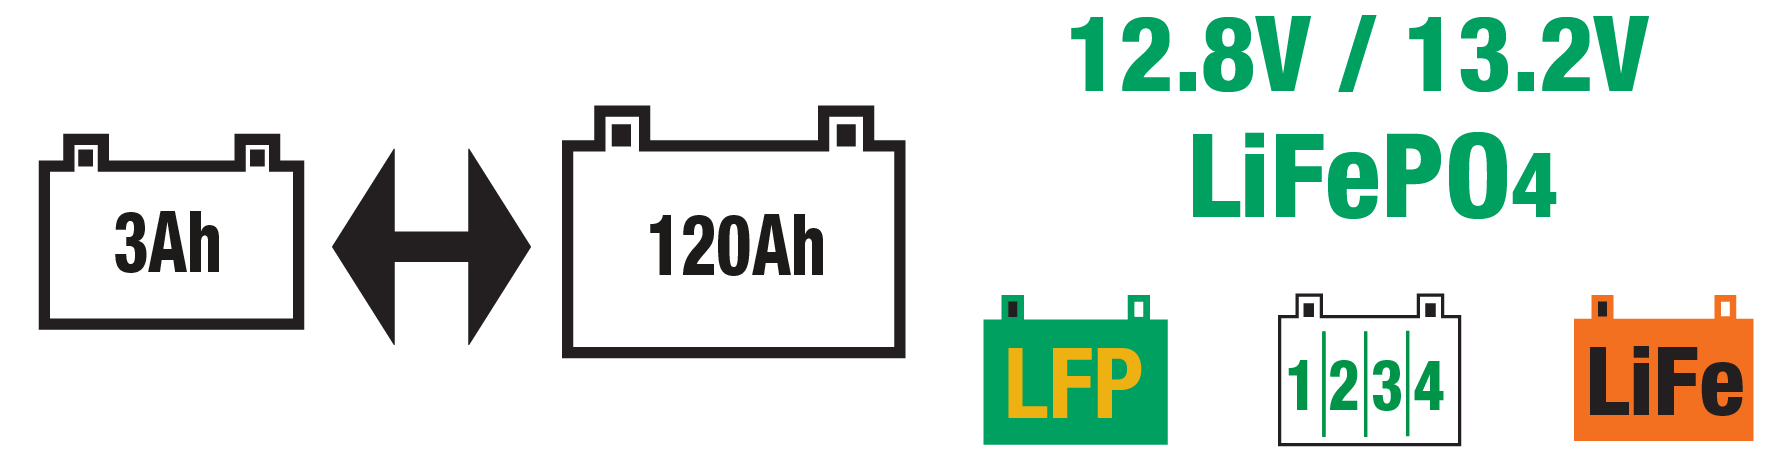 The 10a lithium battery charger is ideal for 12.8V/13.2V LiFePO4 / LFP batteries.